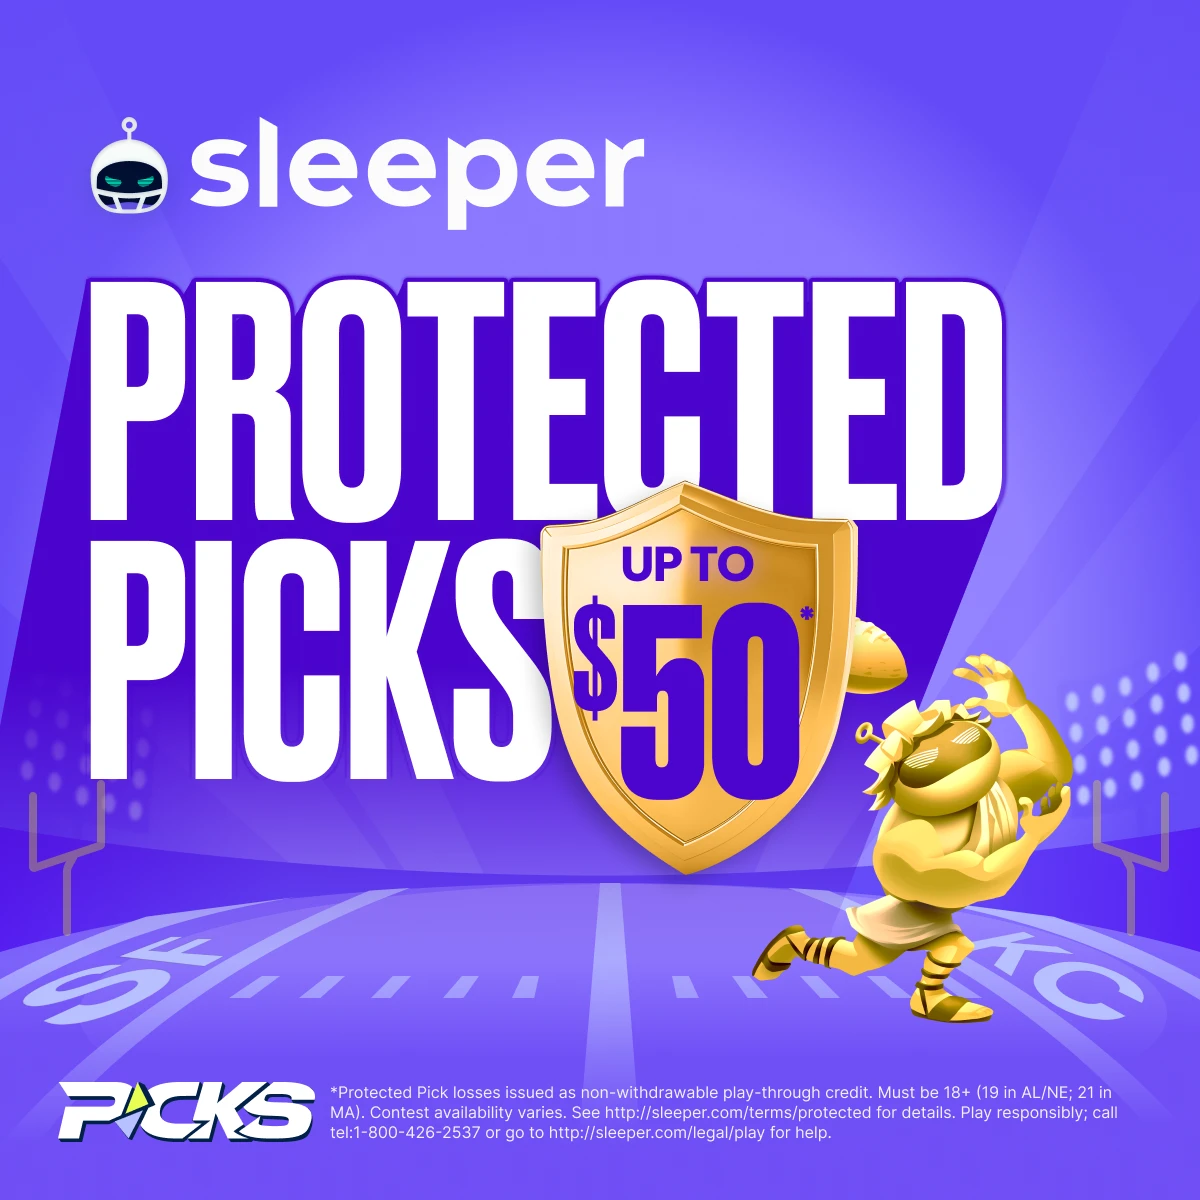 Super Bowl prop bet special from Sleeper Fantasy is up to a $50 protected pick. 